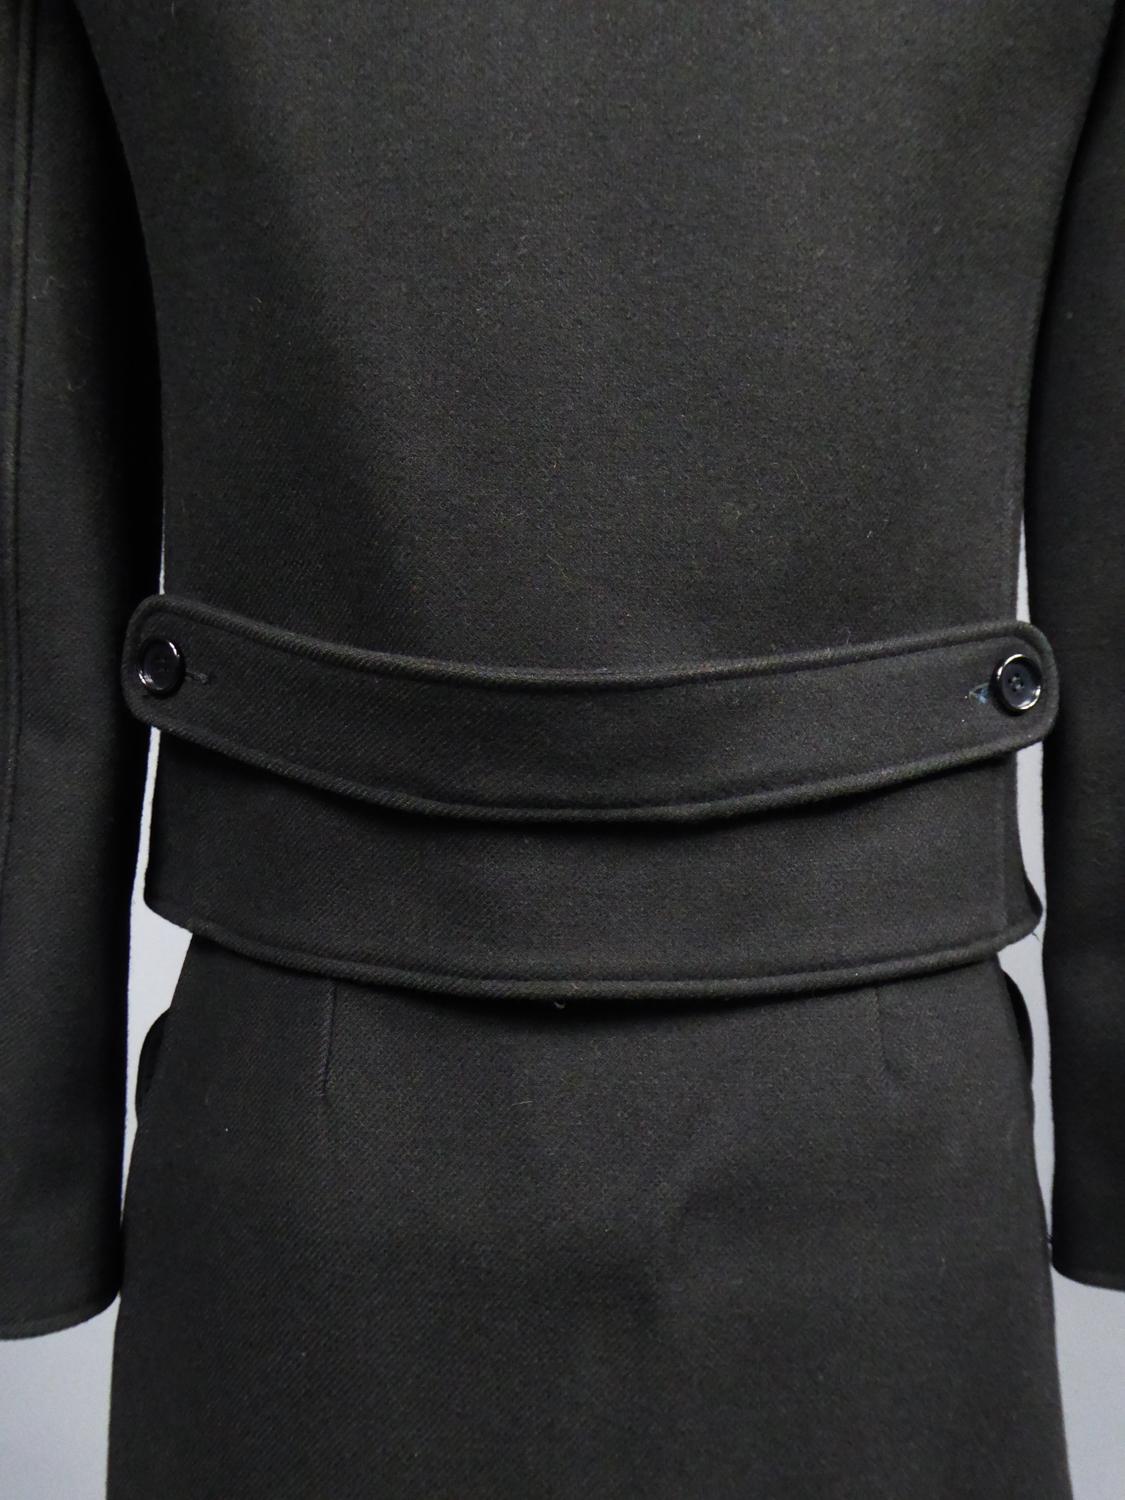 André Courrèges Haute Couture Skirt Suit In Black Wool Circa 1968/1975  For Sale 9